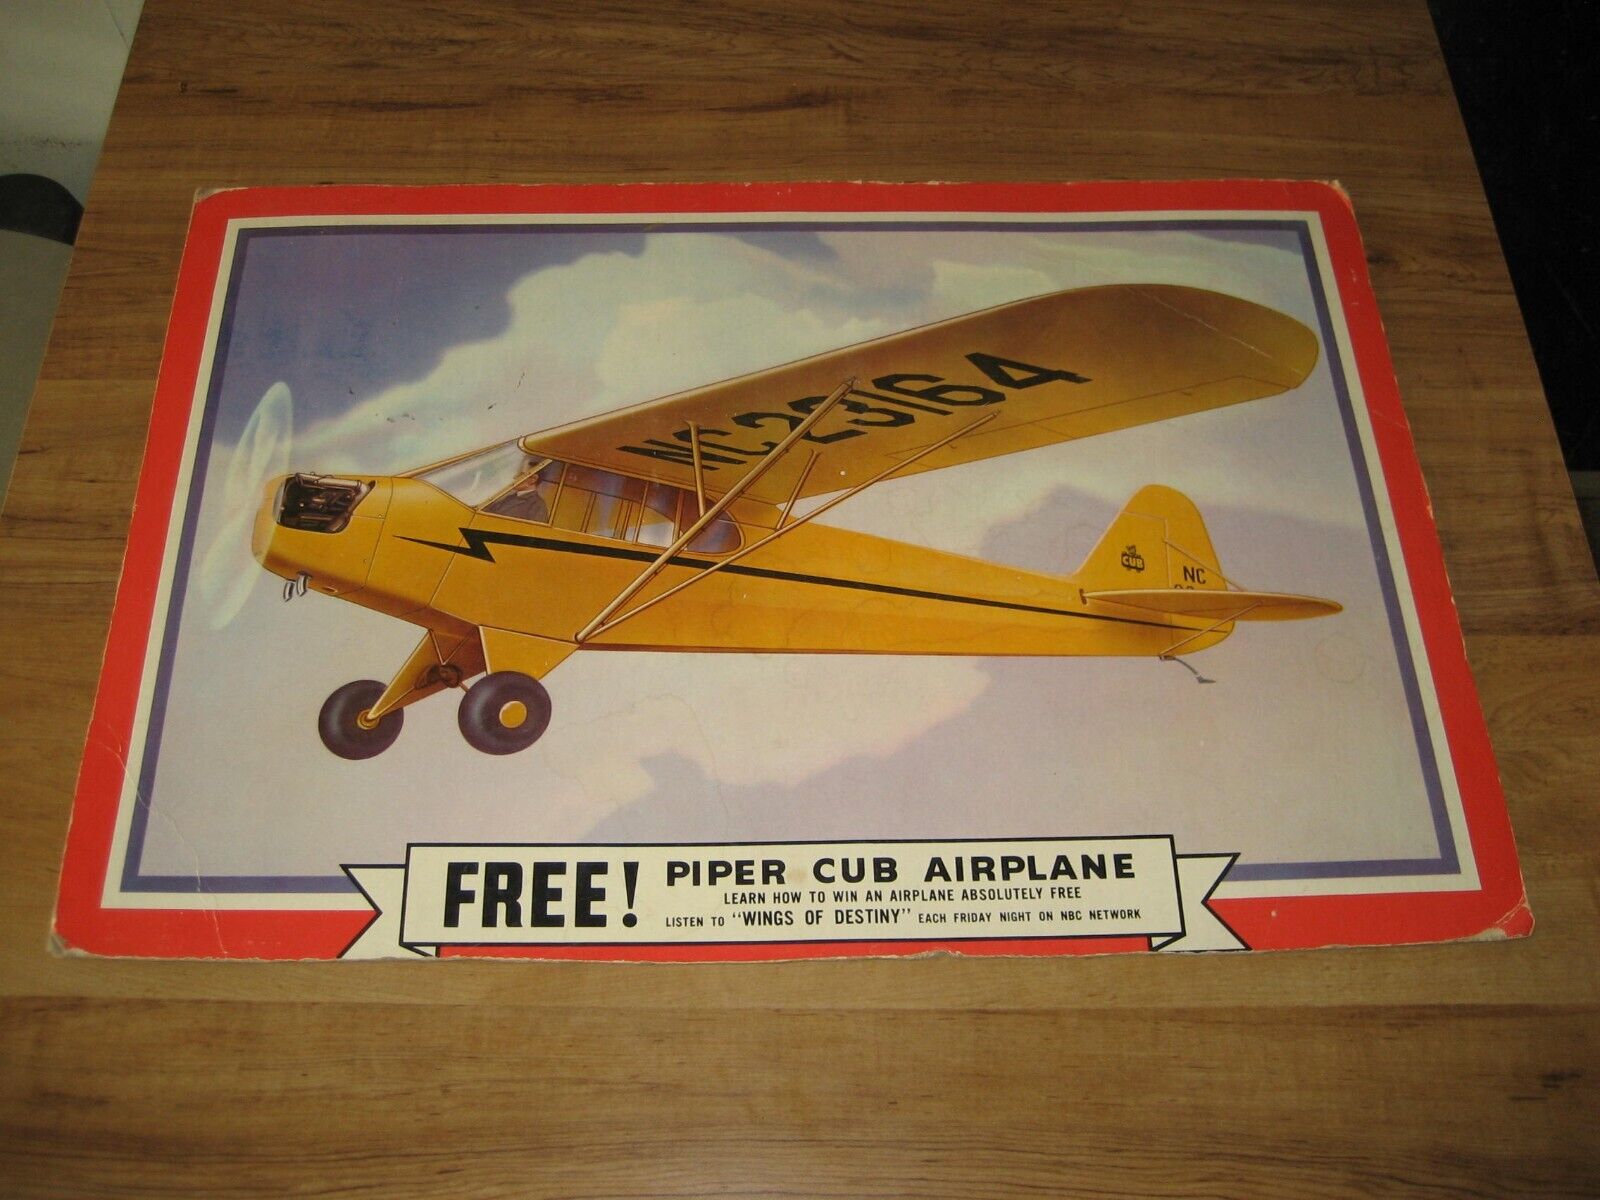 1950 Free Piper Cub Airplane Cardboard Poster-Wings Of Destiny Radio Show Promo